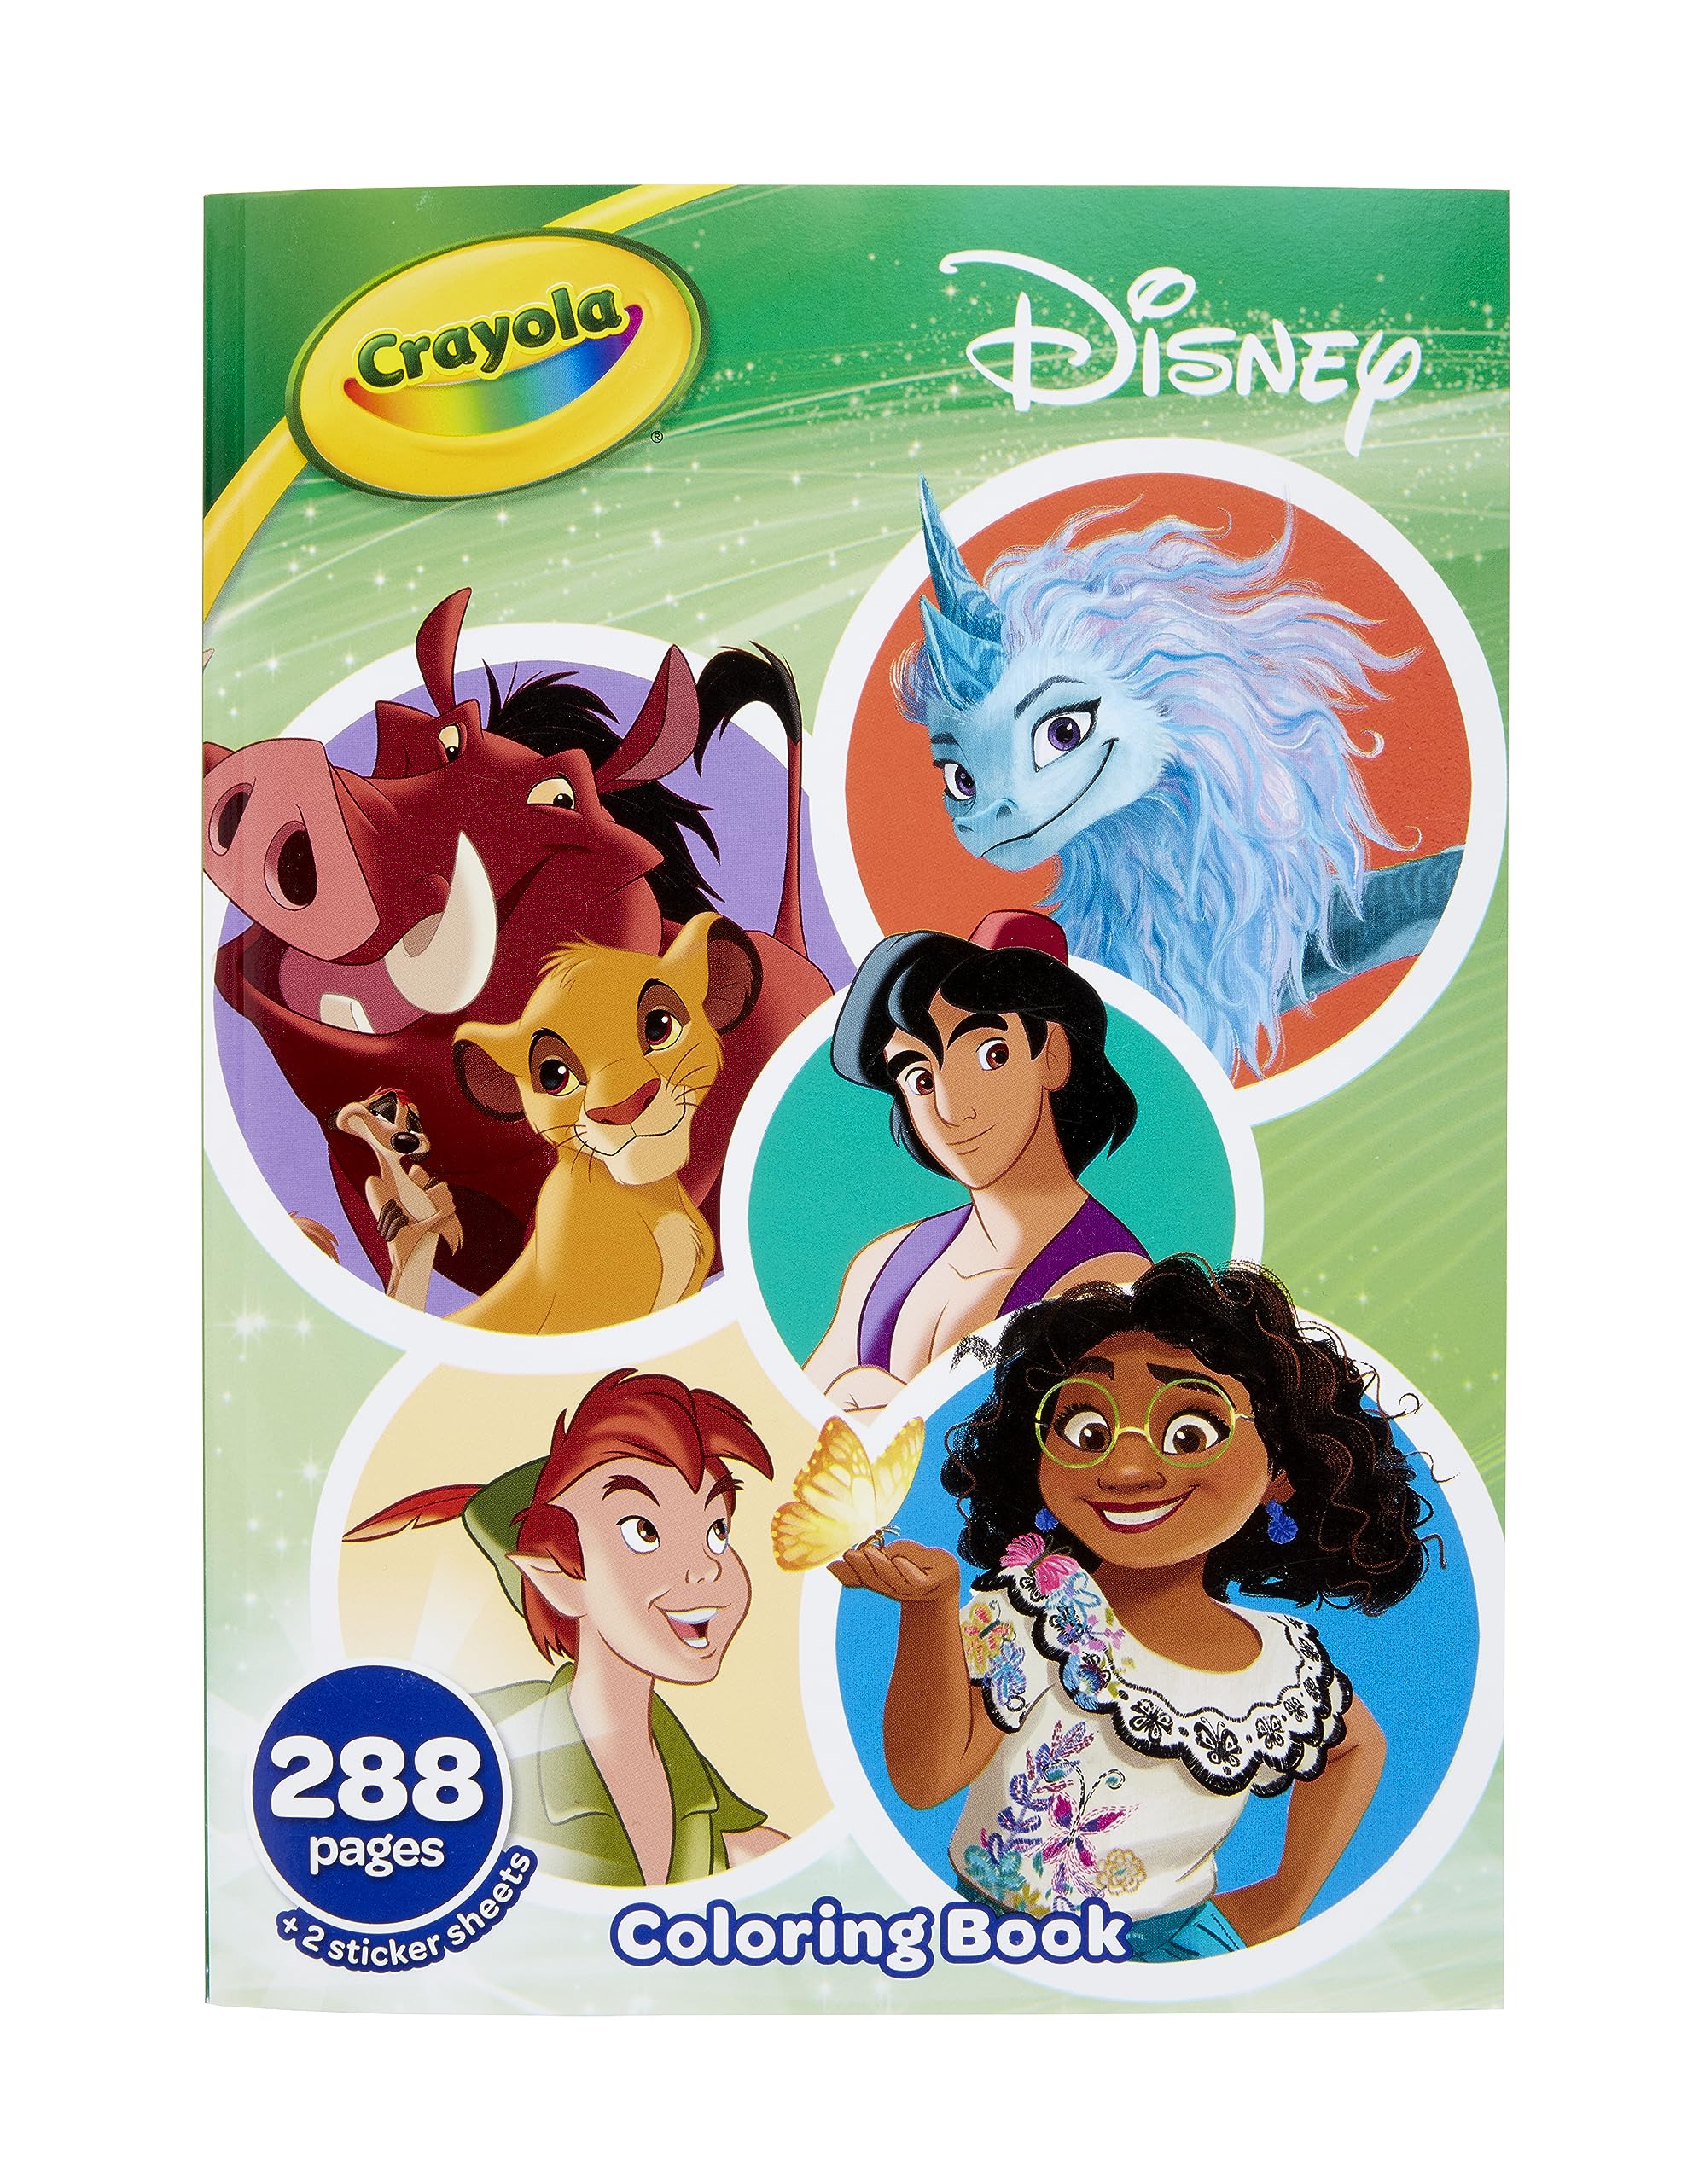 Crayola 96pg Disney Animation Coloring Book with Sticker Sheet, Gift for Girls & Boys, Ages 3+